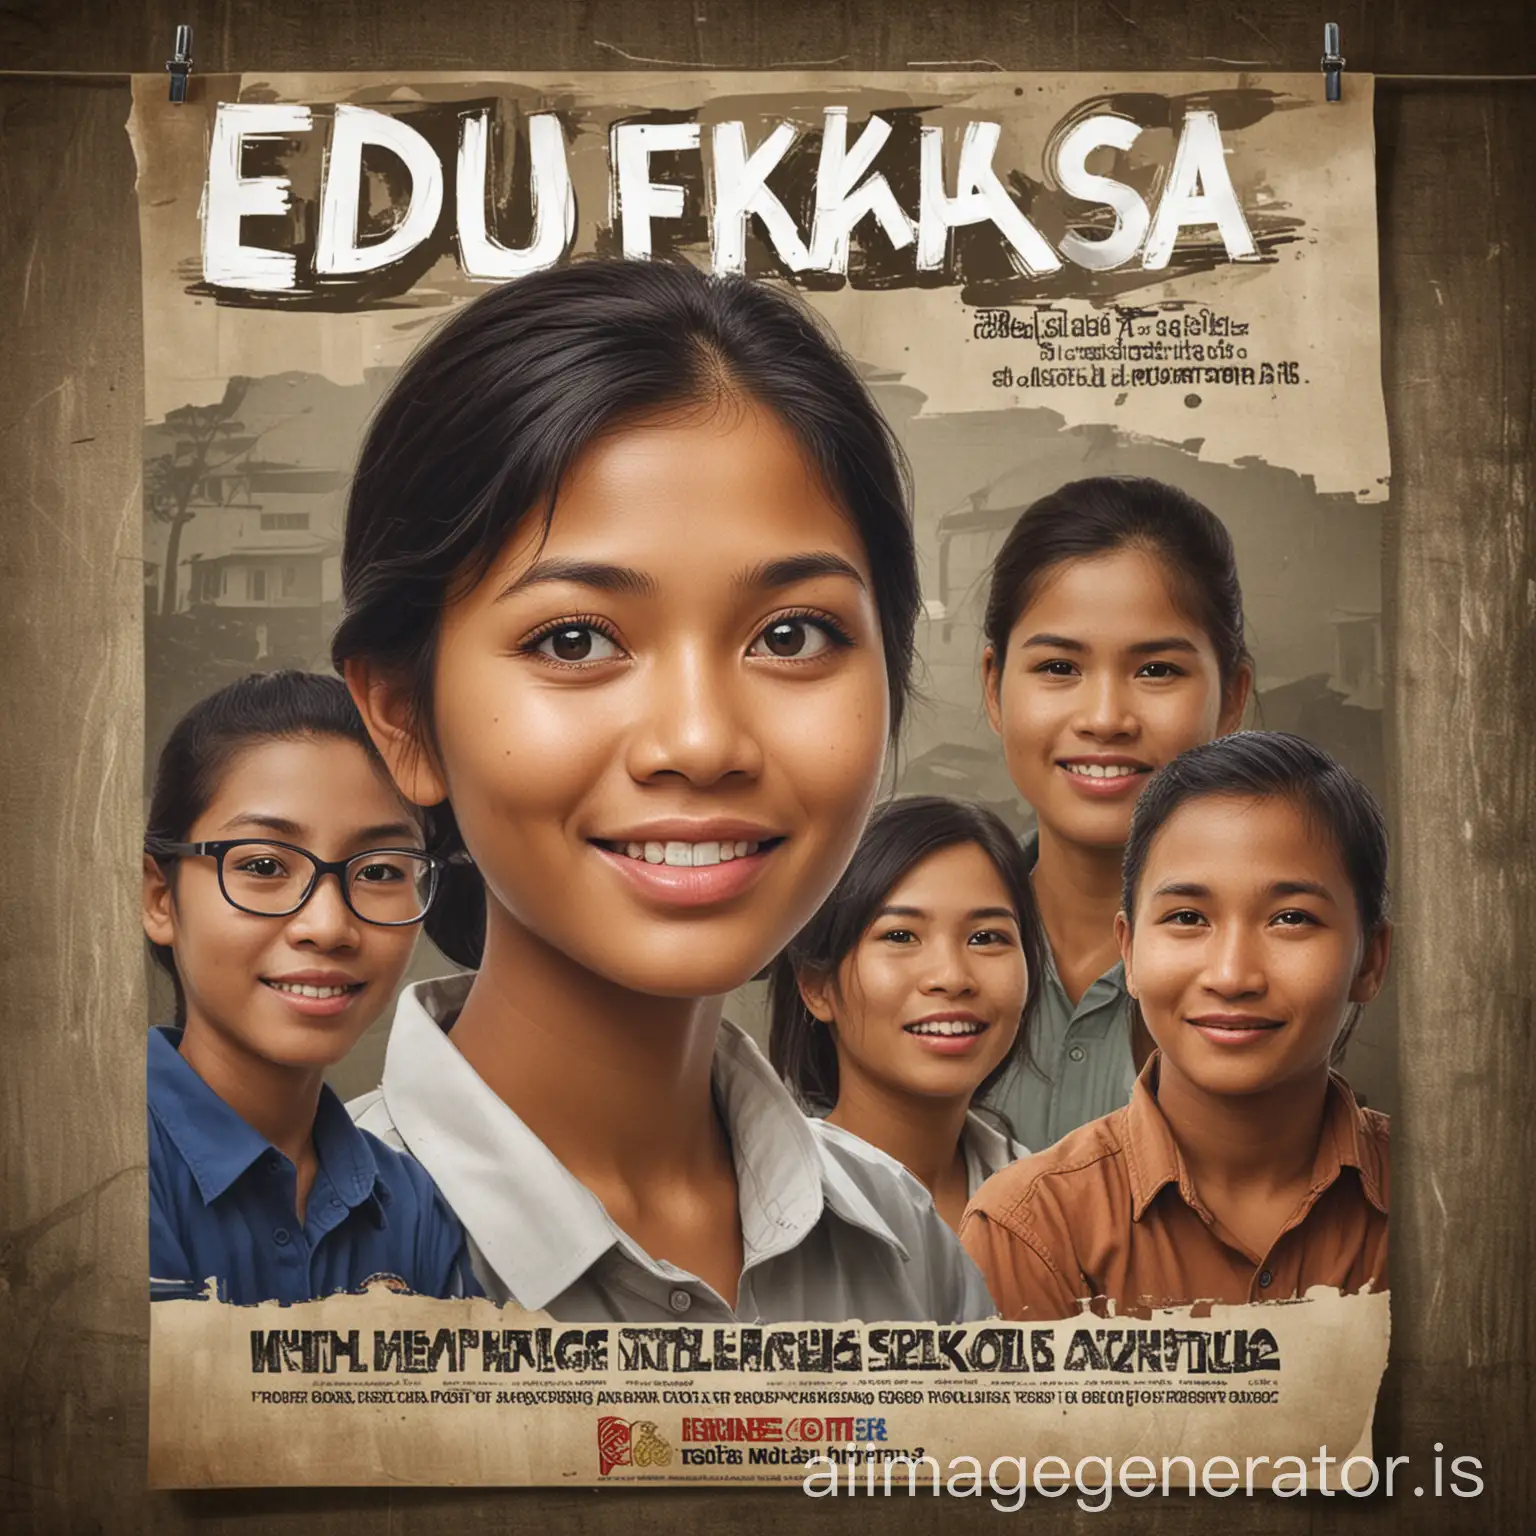 create a campaign poster for our proram entitled EDUKHASA. The program aims to help the illiterate people of the barangay by educating them on the fundamentals of school and helping them to be prepared for the continuous upskilling through the program of Technical Education and Skills Development Authority (TESDA).